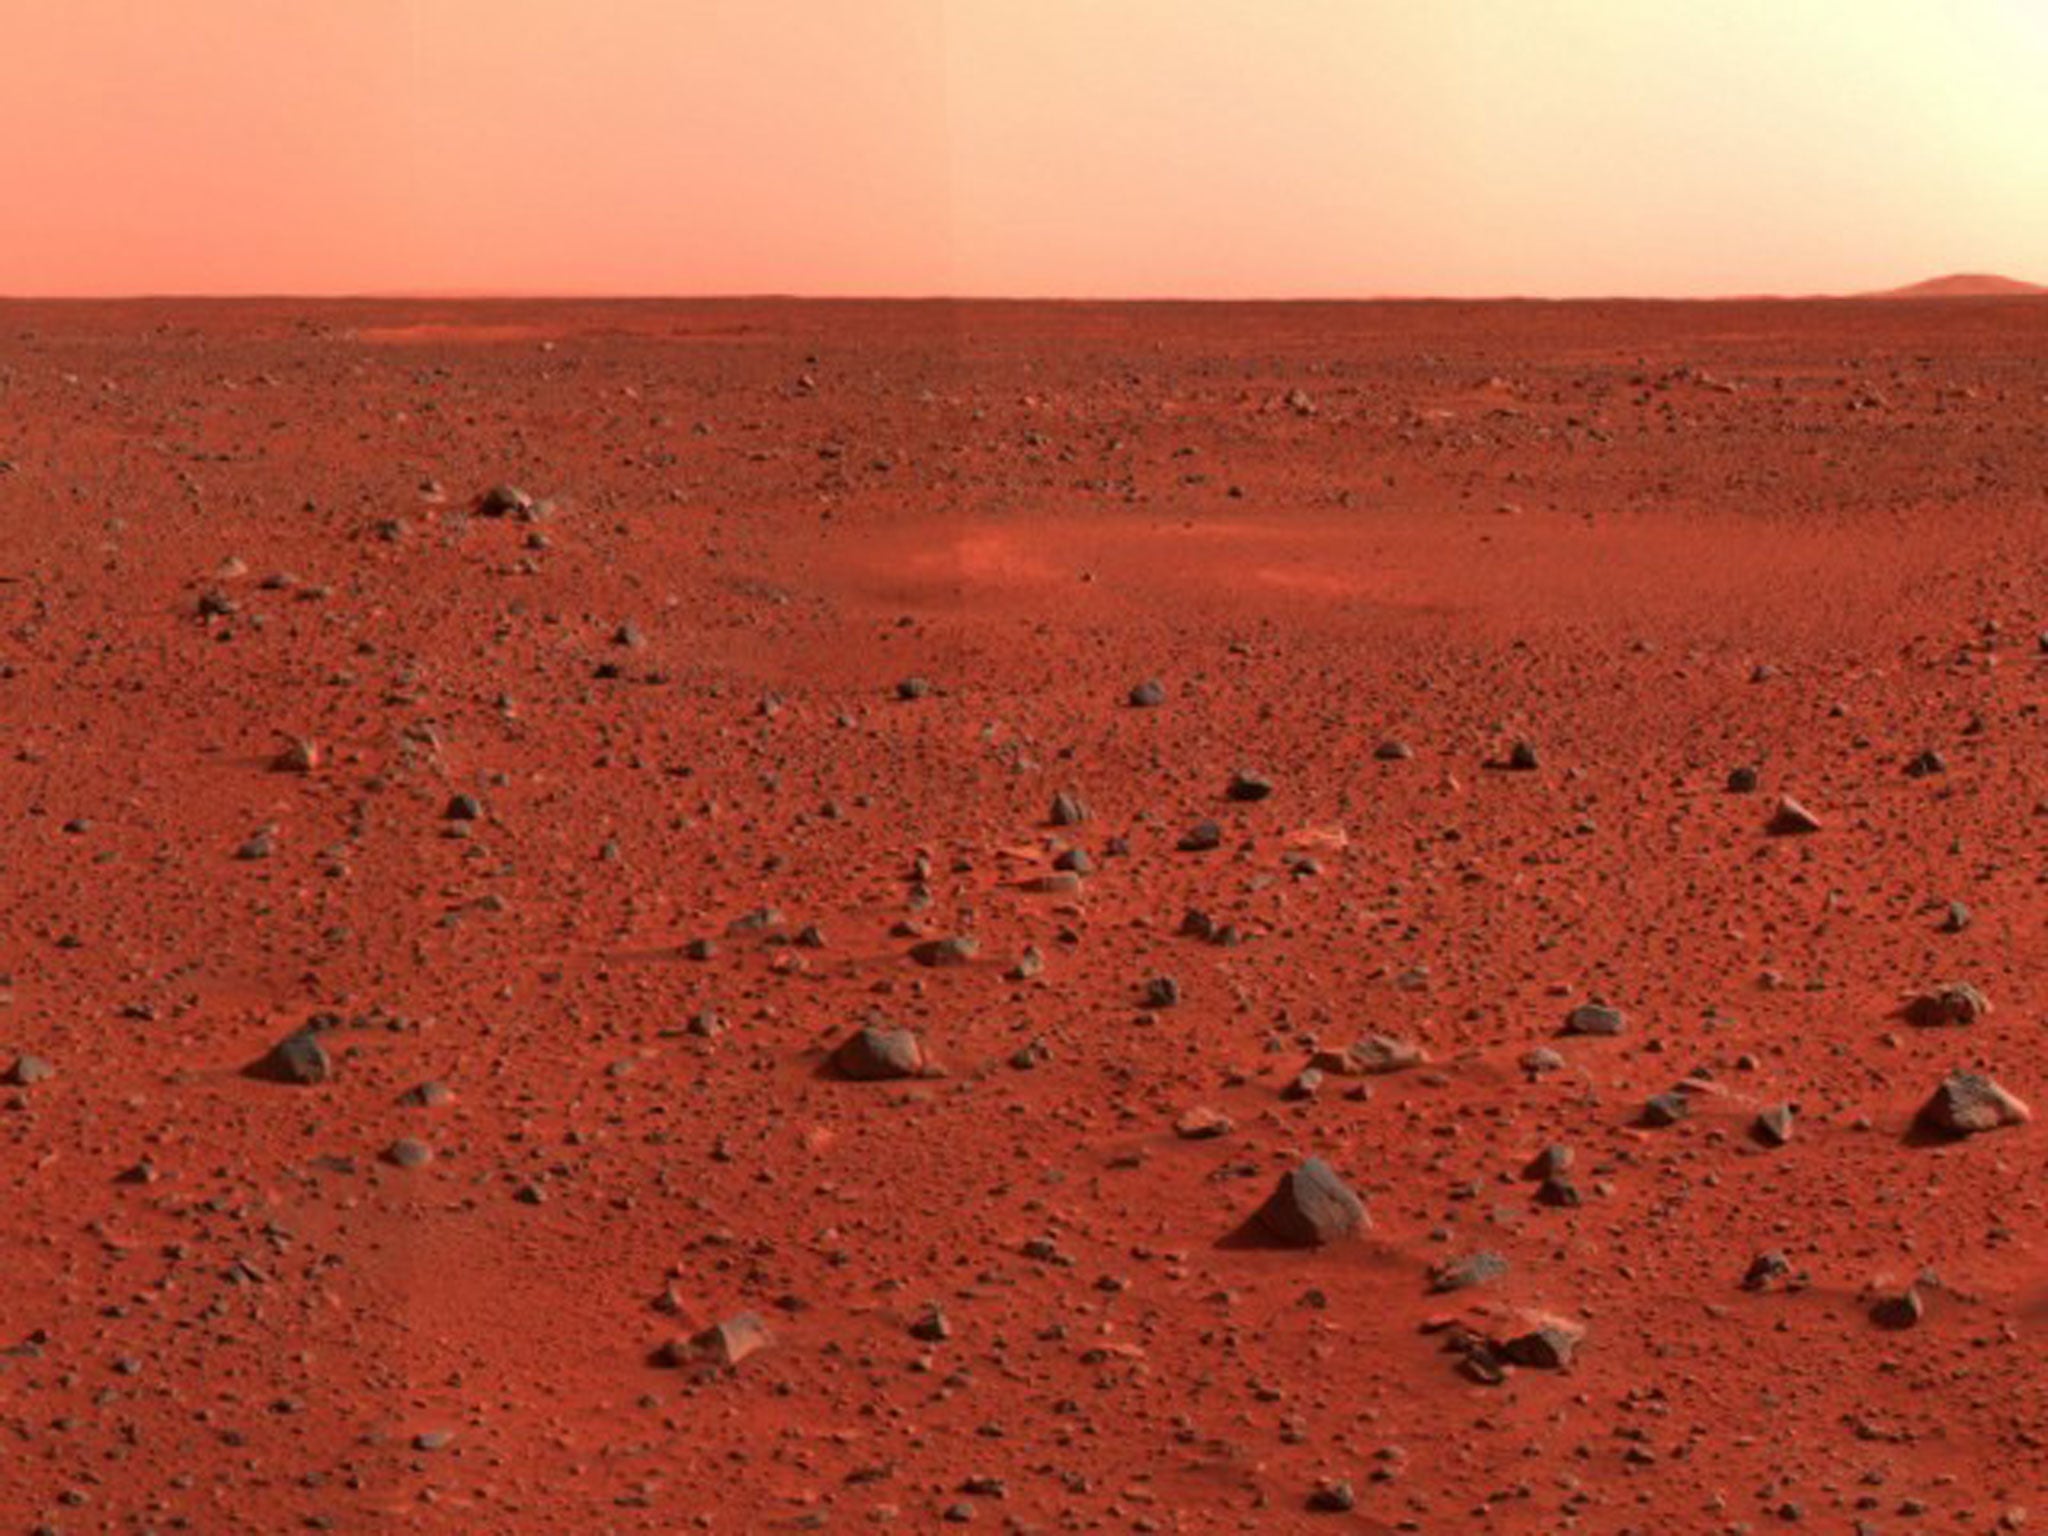 The Mars One mission aims to establish a permanent human settlement on the red planet.